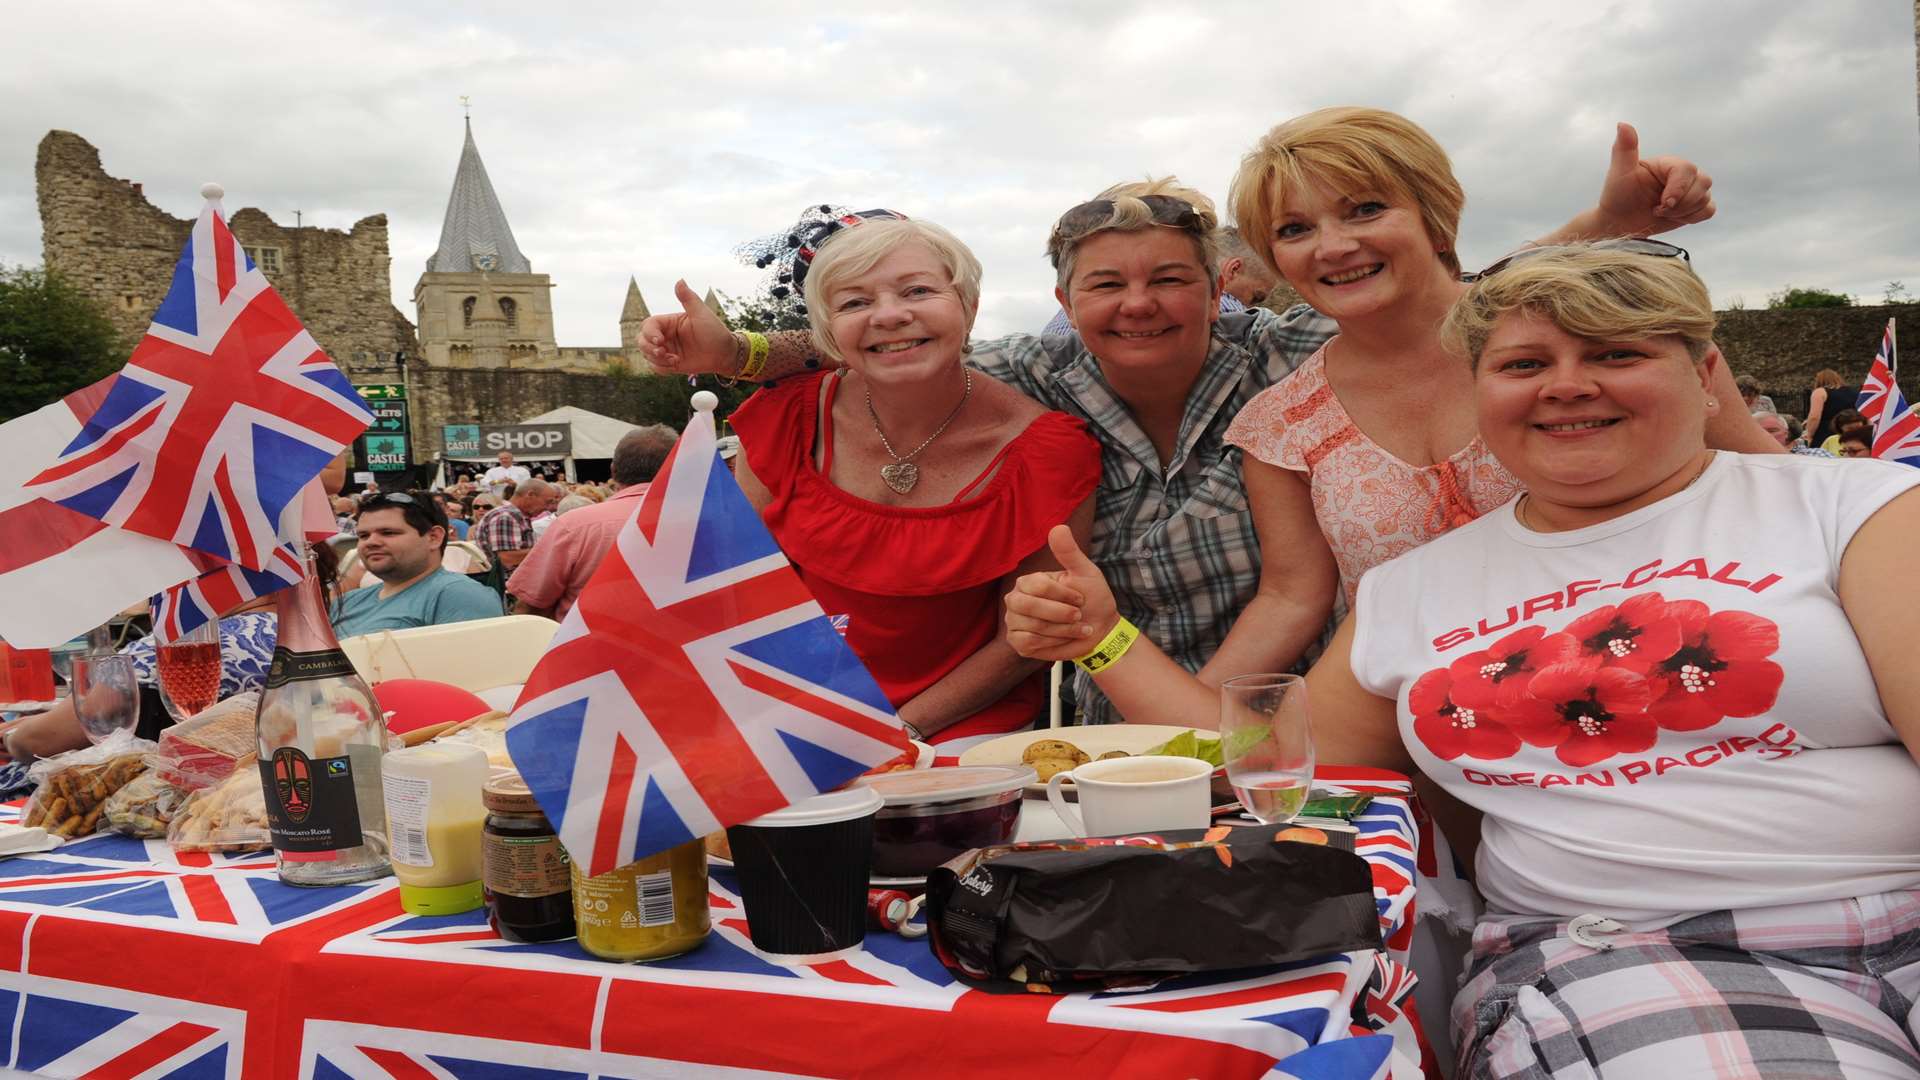 Picnic and promenading at the Military Proms, the finale to the Castle Concerts series at Rochester Picture: Steve Cripse